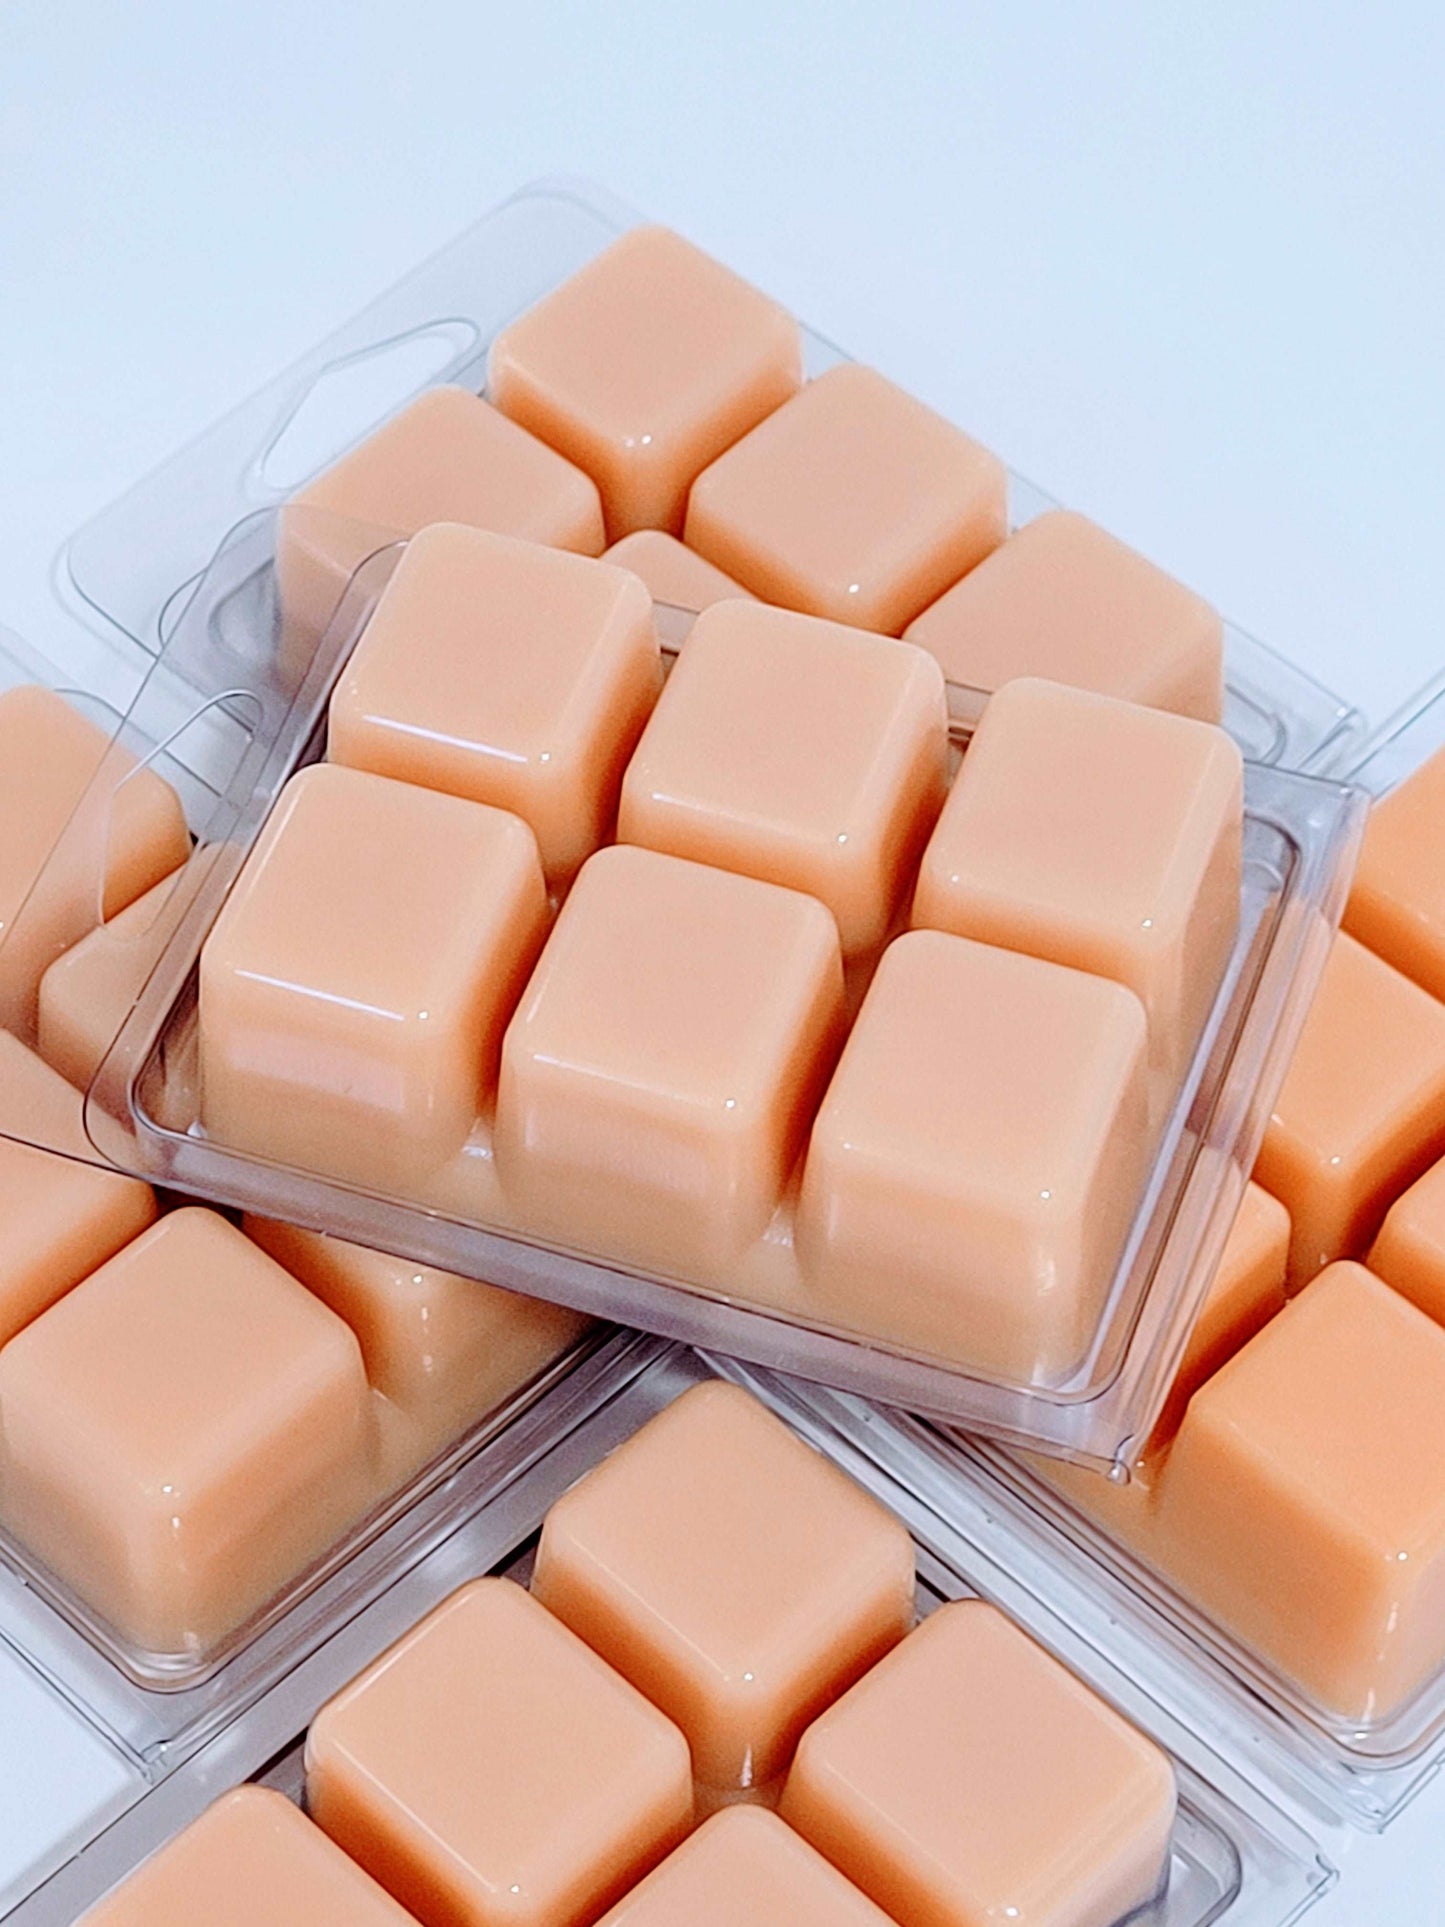 Maple Wax Melts | Scents by Shaizy